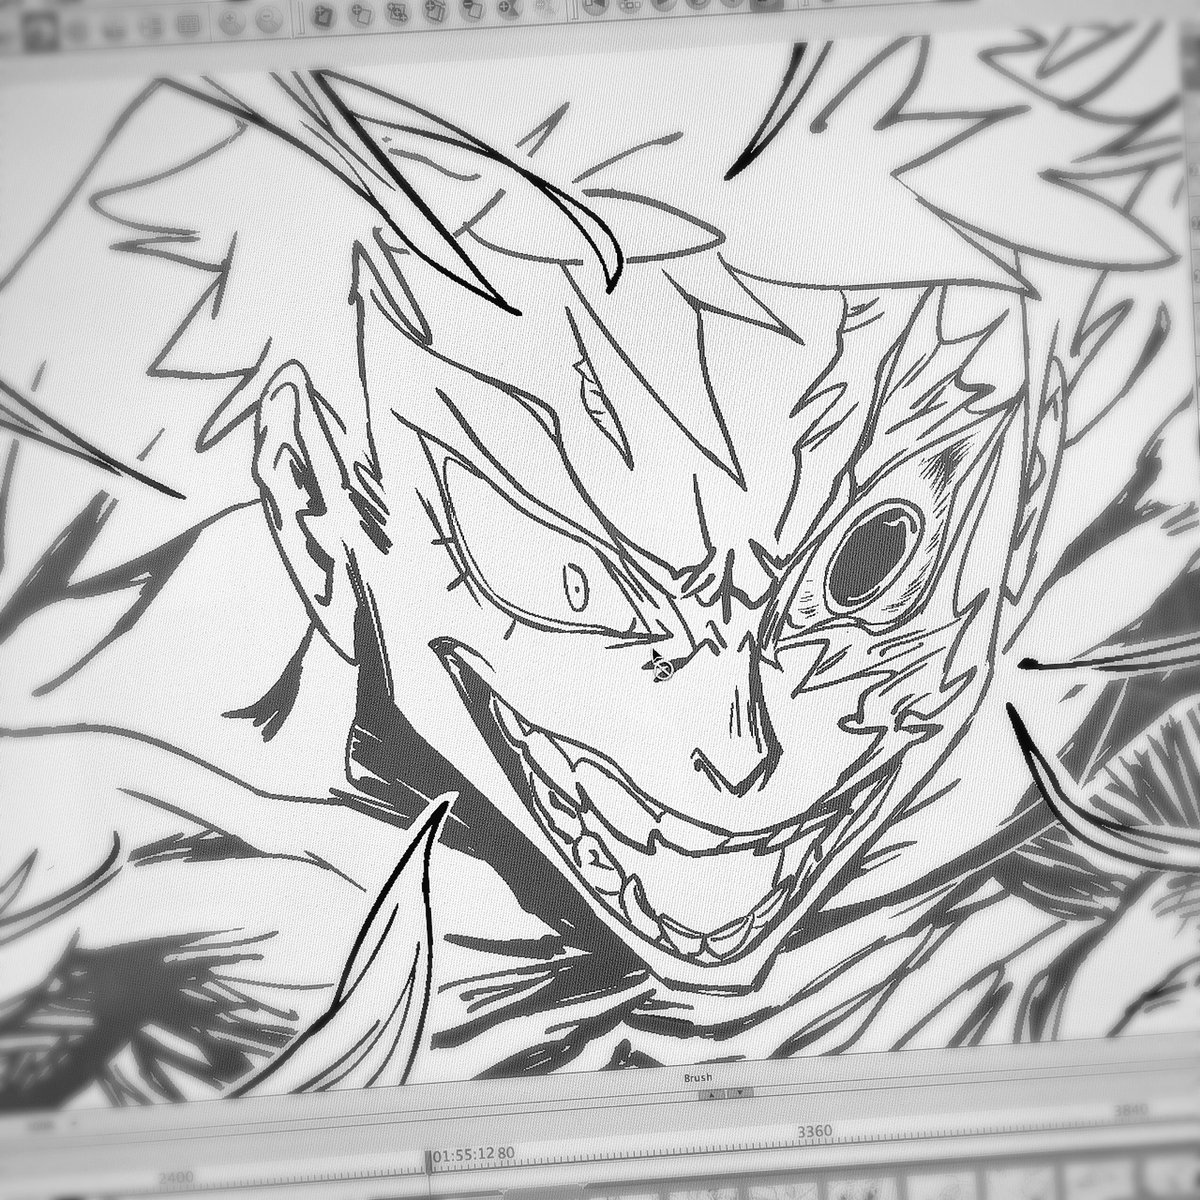 WIPs - Thanks to this brute, I can work on insane expressions without retenue ?
#mha #bnha #heroaca_a #muscular #マスキュラー 